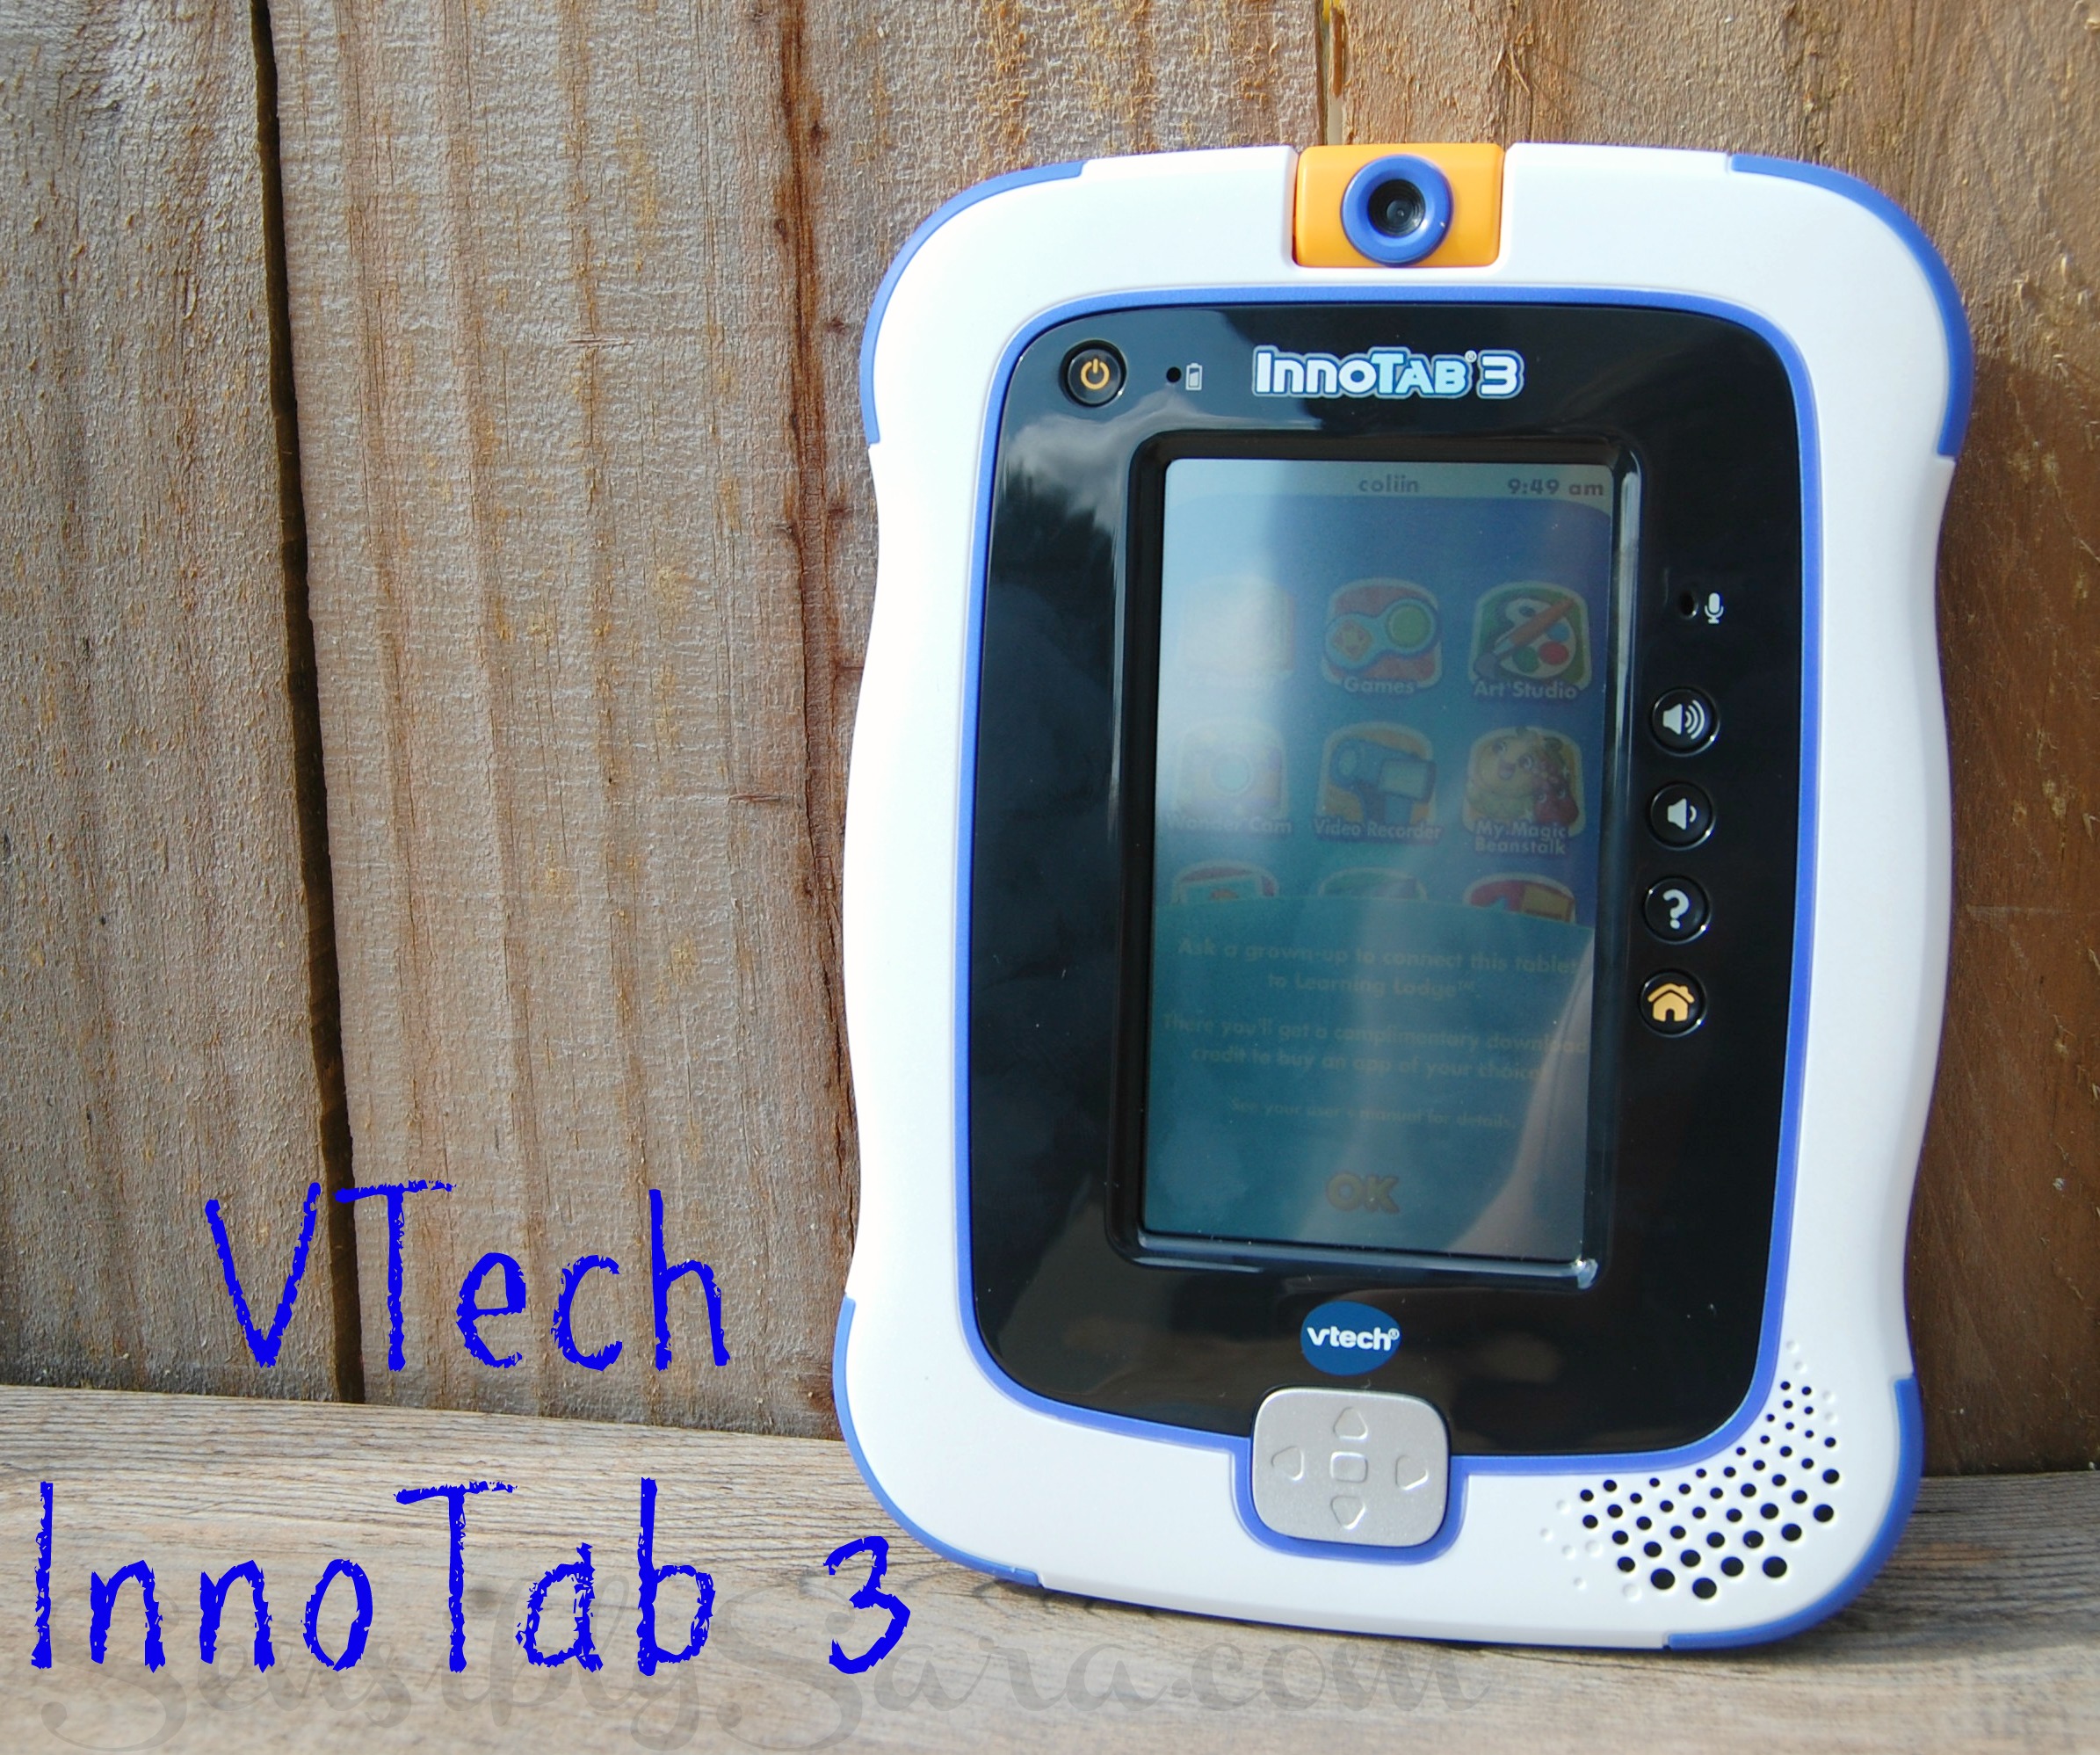 InnoTab 3 Plus - The Learning Tablet